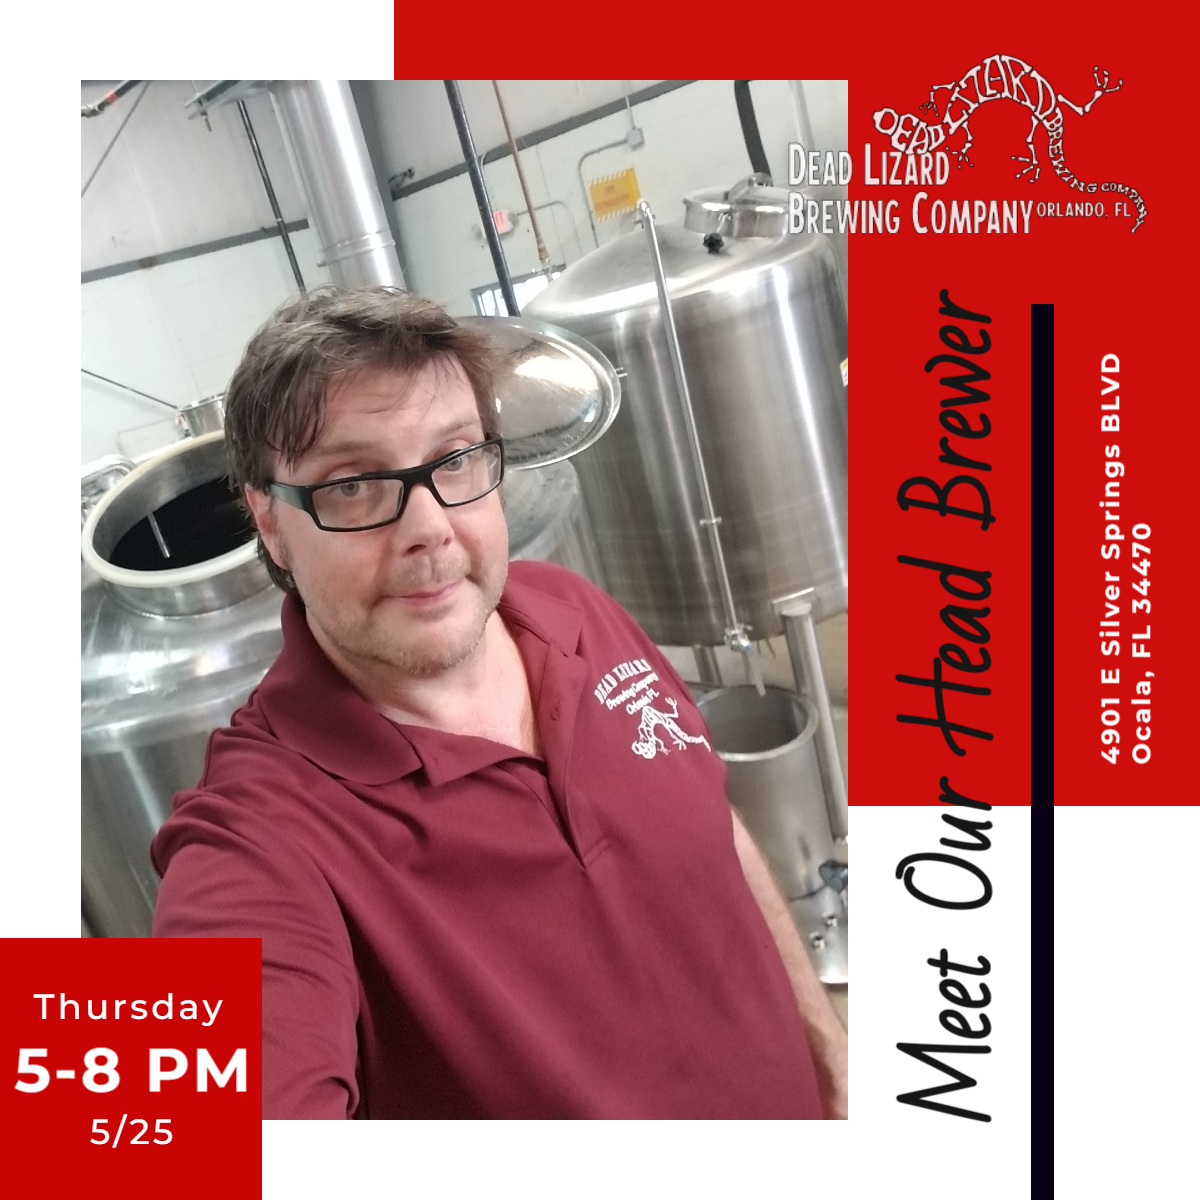 Join us Tomorrow! We'll be at Sandy's Shack in Ocala from 5-8PM!

You can also find us at Pammie's Sammies, Grassroots Natural Market, & Rising Tide Tap & Table. deadlizardbrewing.com/locator

 #deadlizardbrew #craftbeerlife #localbeer #beertasting